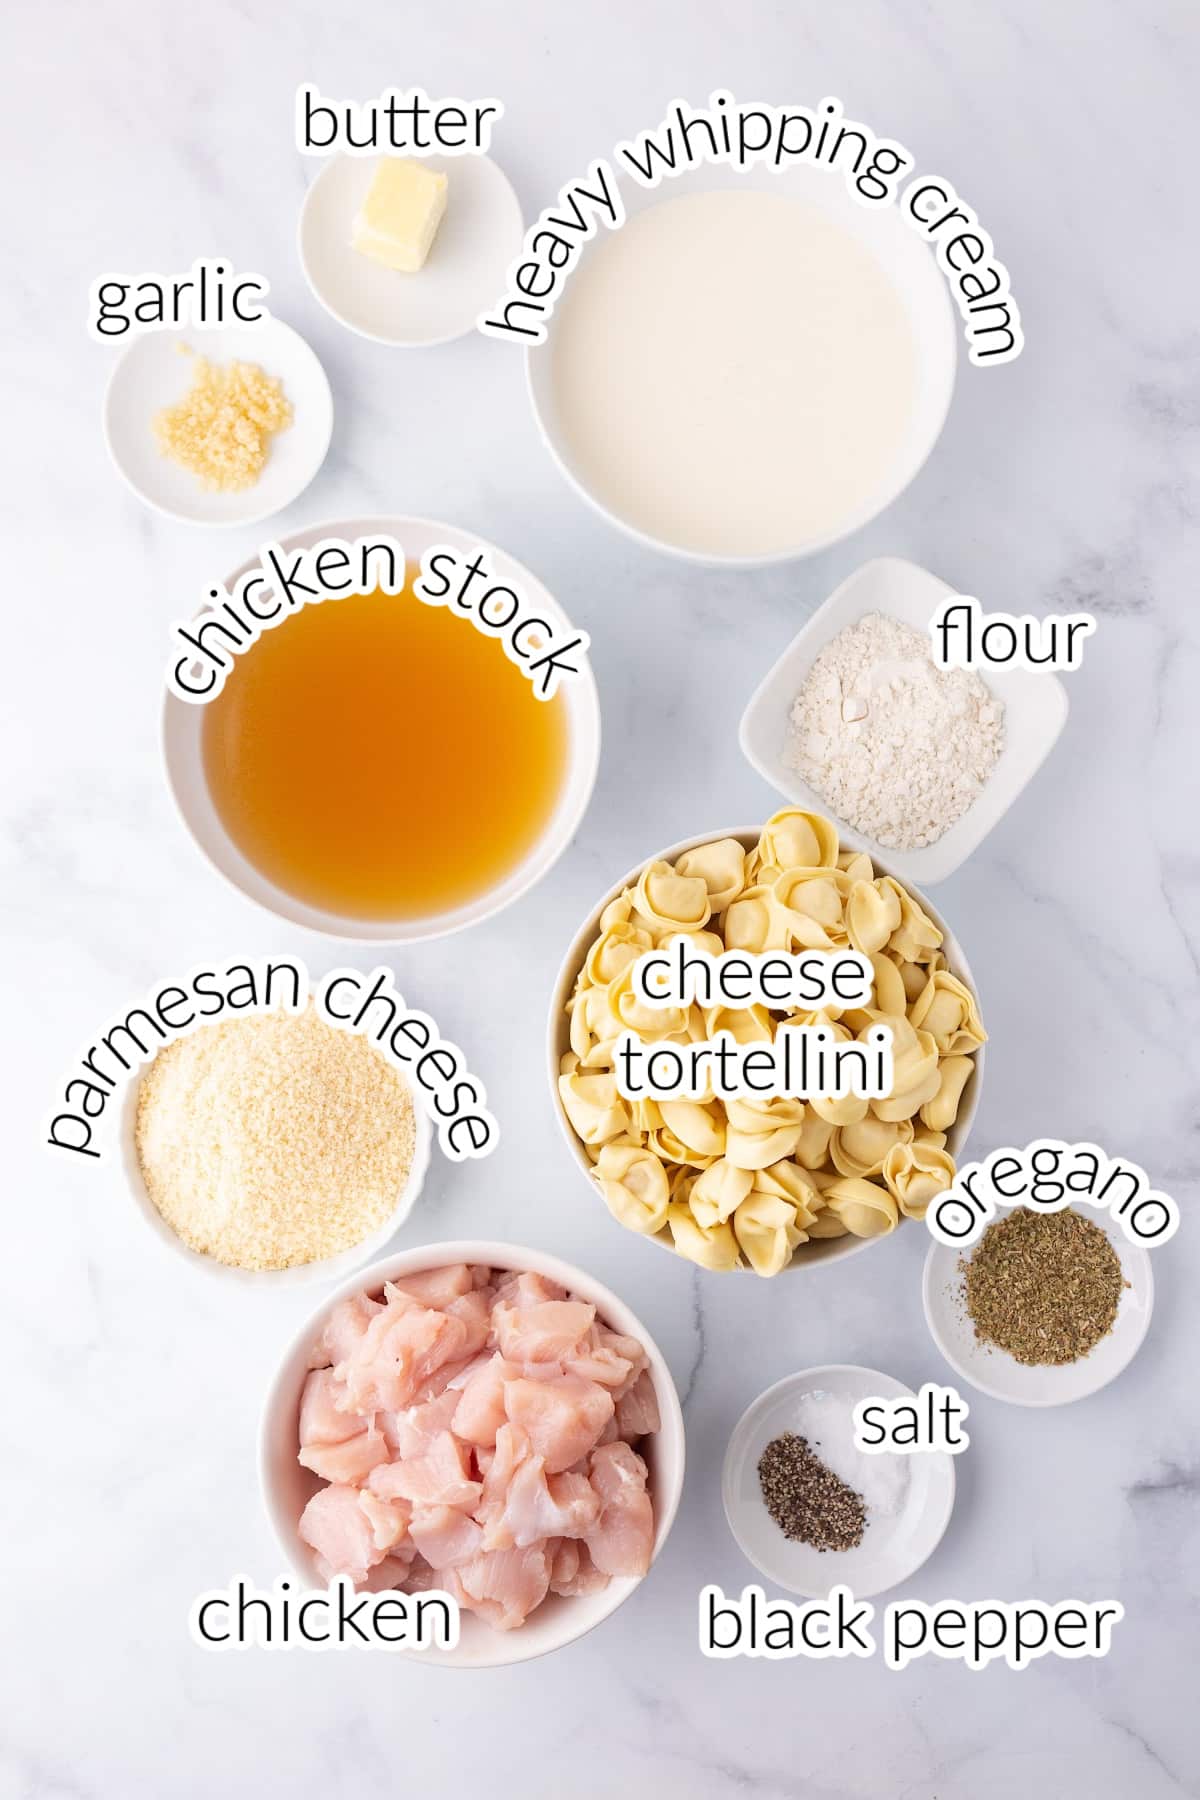 Recipe ingredients on a white surface.